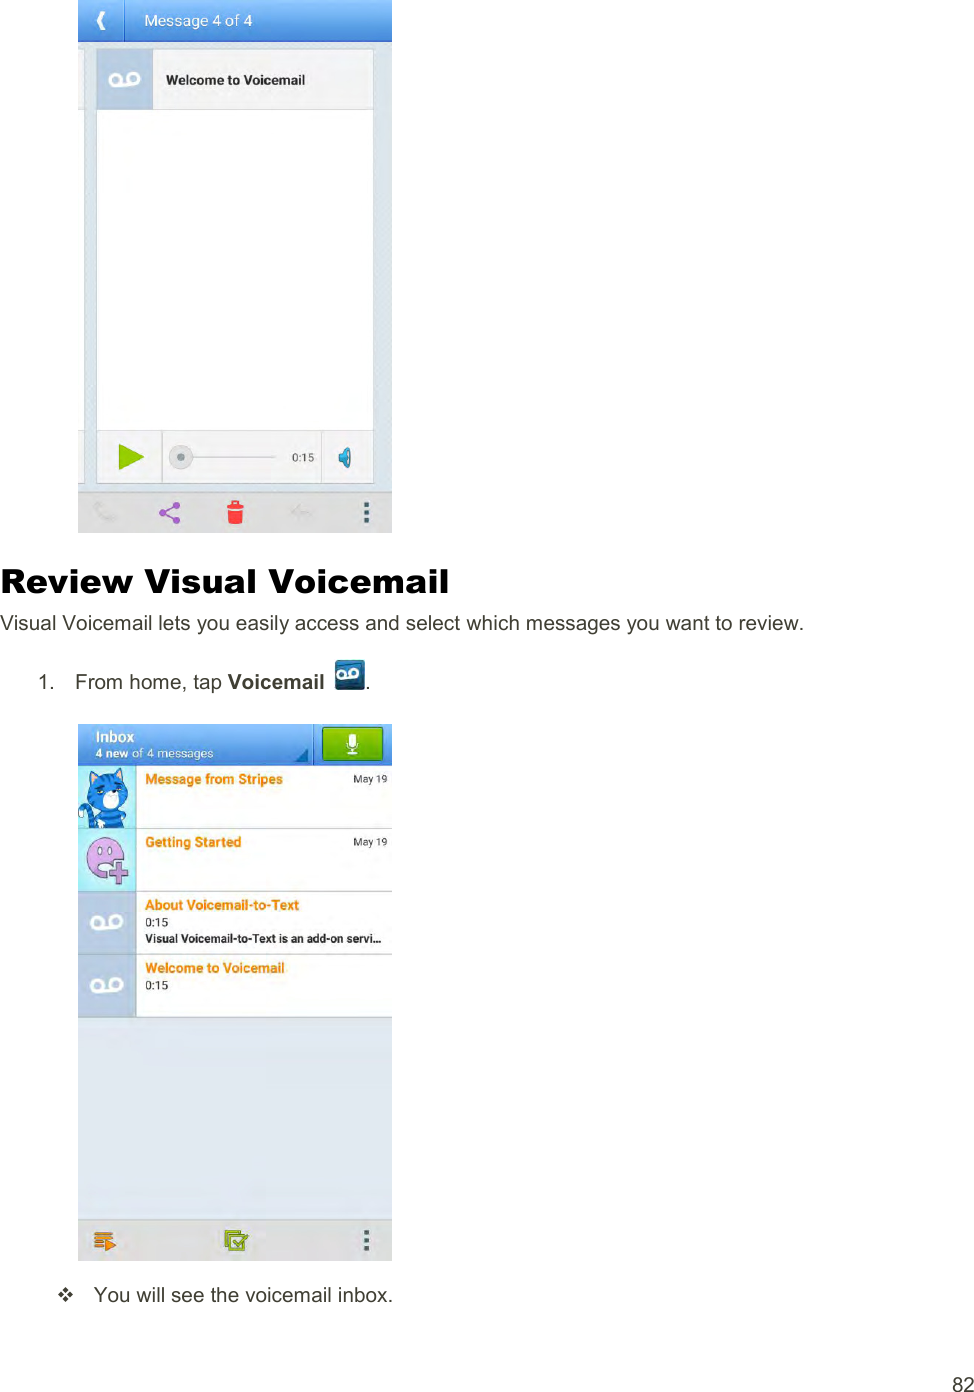  82   Review Visual Voicemail Visual Voicemail lets you easily access and select which messages you want to review. 1.  From home, tap Voicemail  .     You will see the voicemail inbox. 